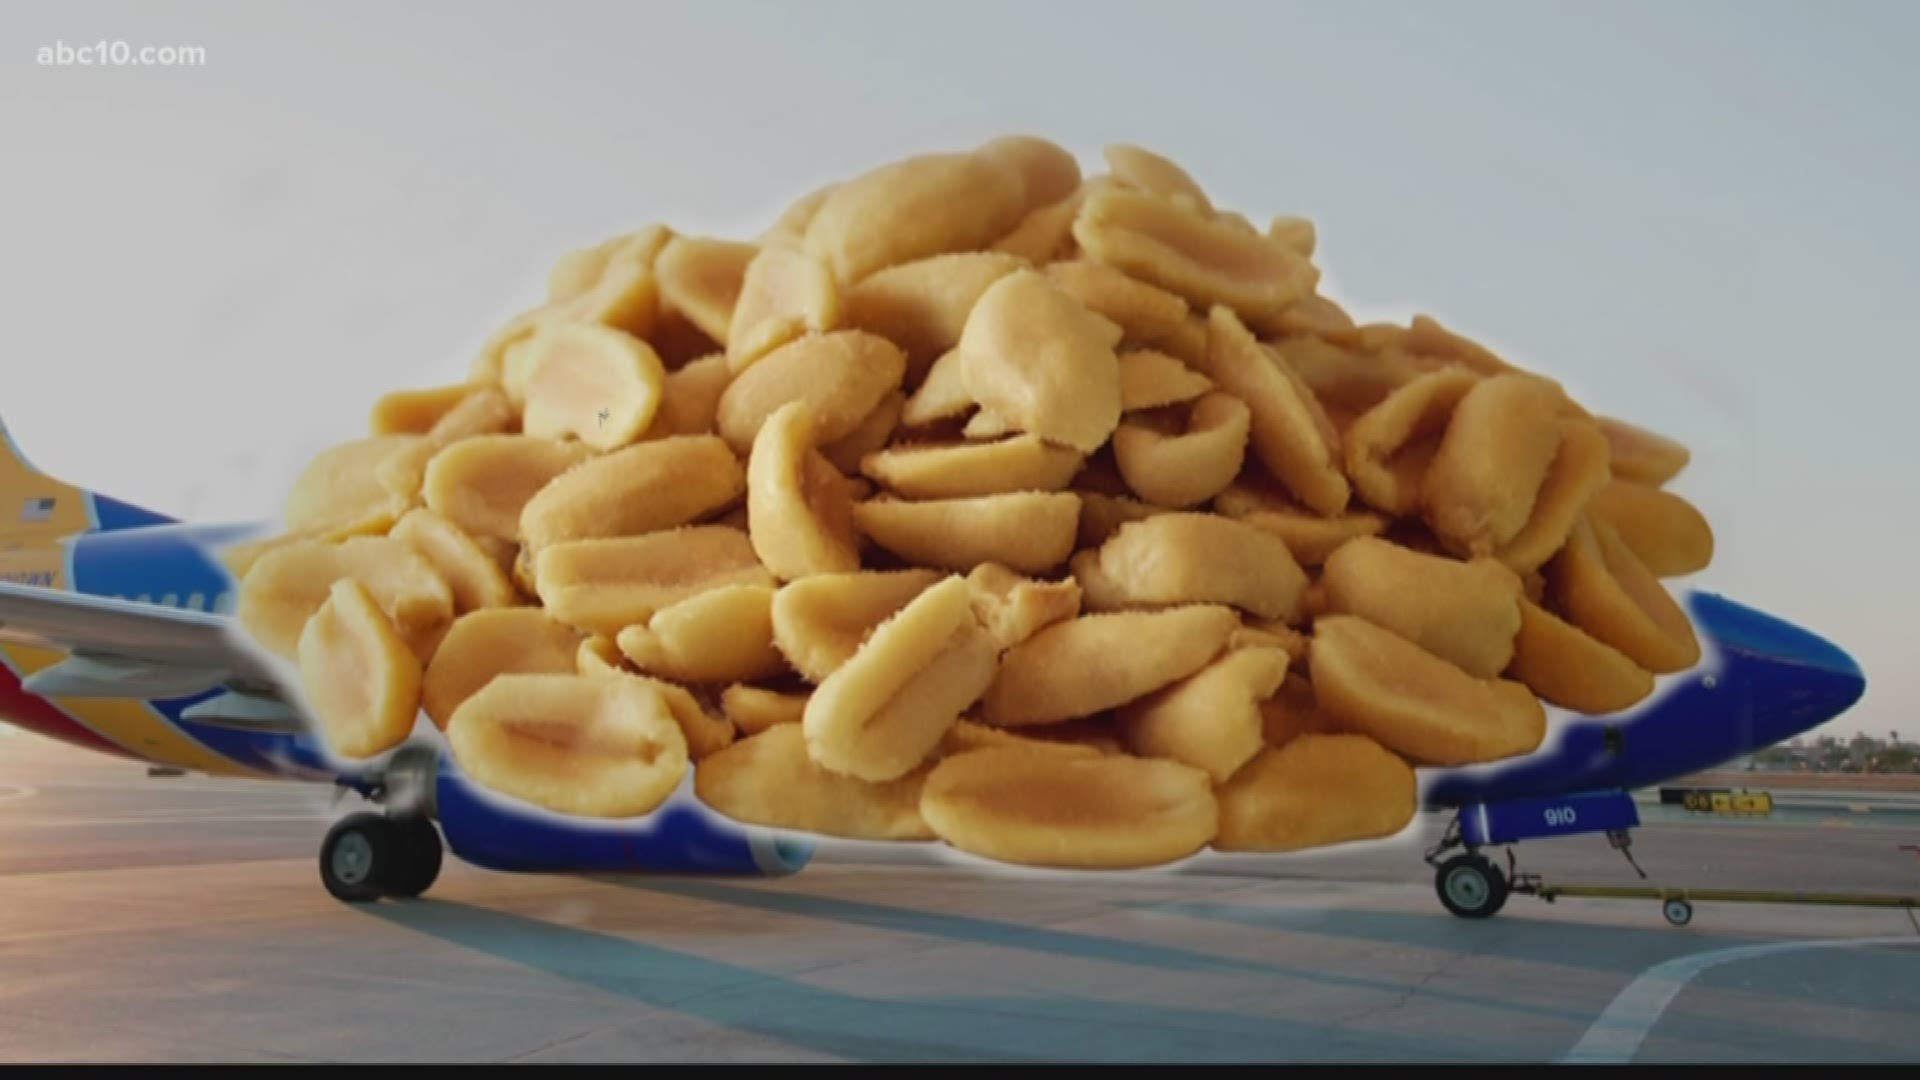 Southwest Airlines says they are nixing peanuts to protect allergic passengers. But, that got us thinking: How did the peanut become a thing anyway? Let's connect the dots.